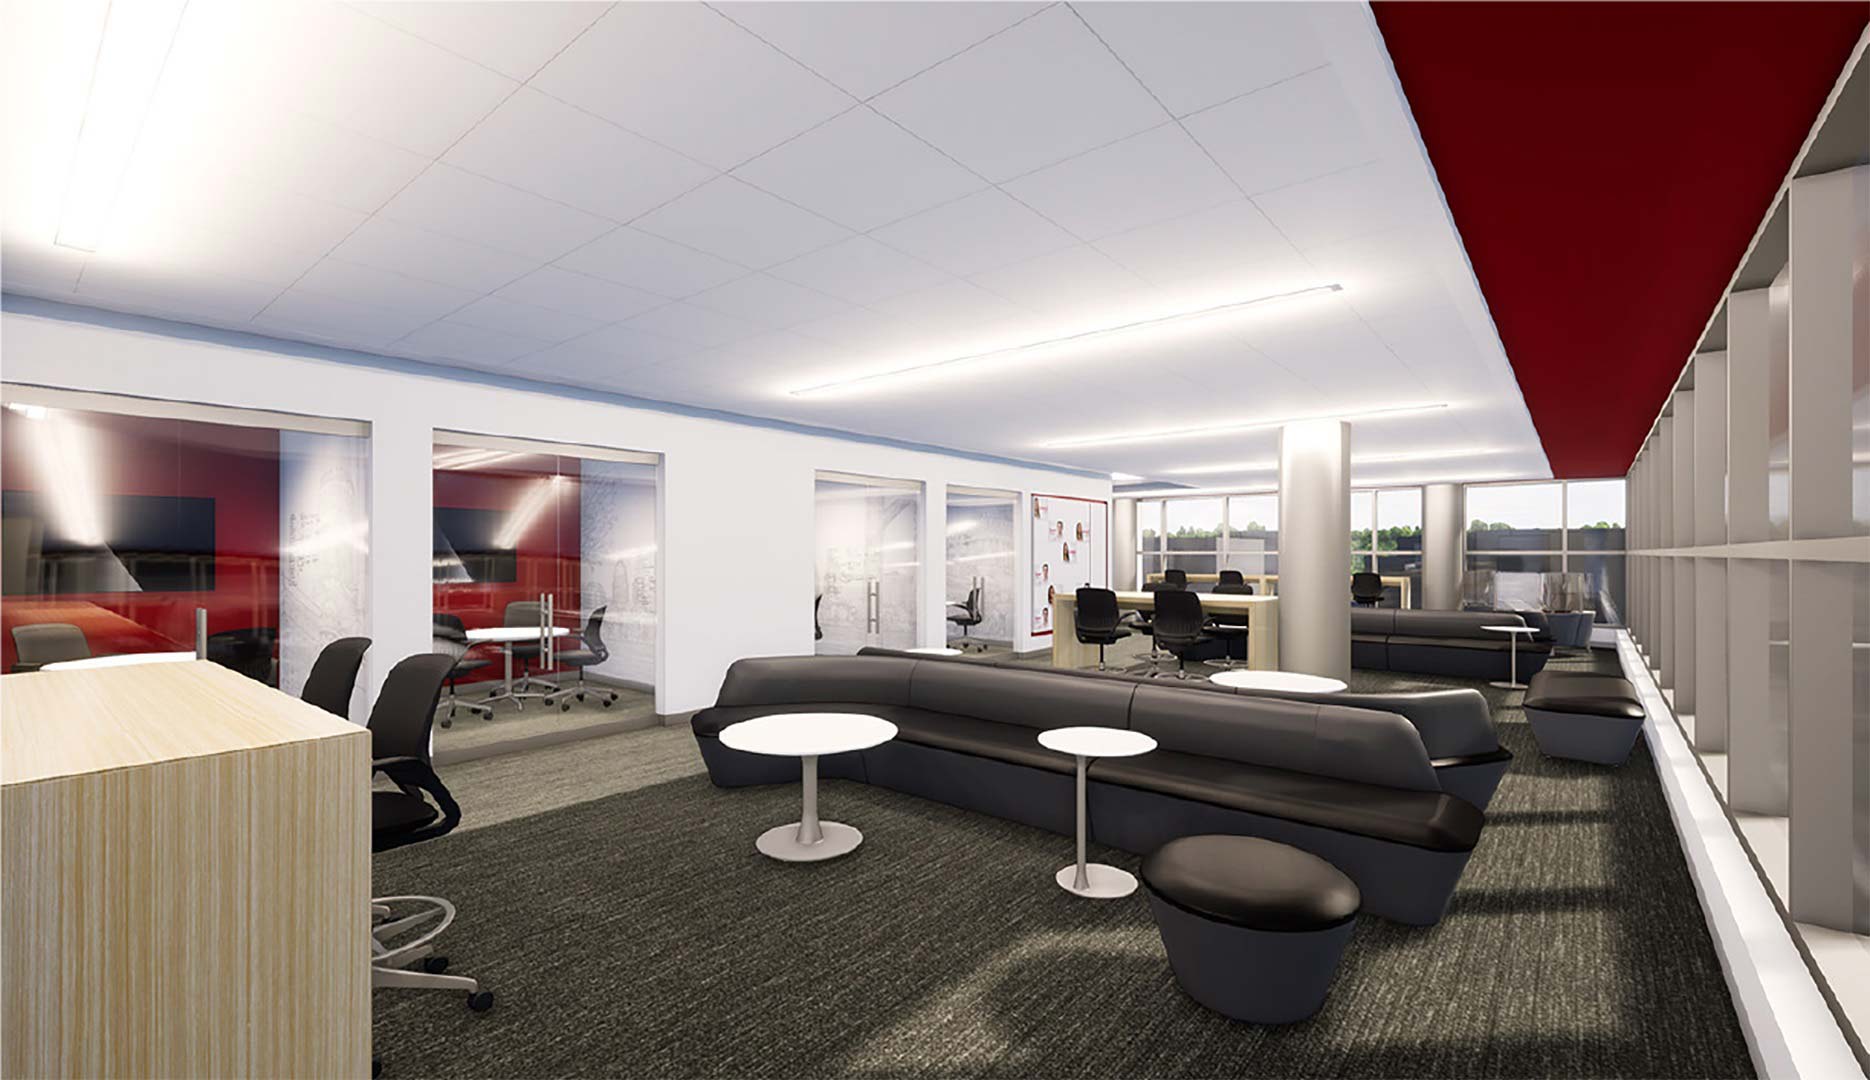 A rendering view of a study area and study rooms. The study area has tables, couches, and chairs with two large glass exterior walls.